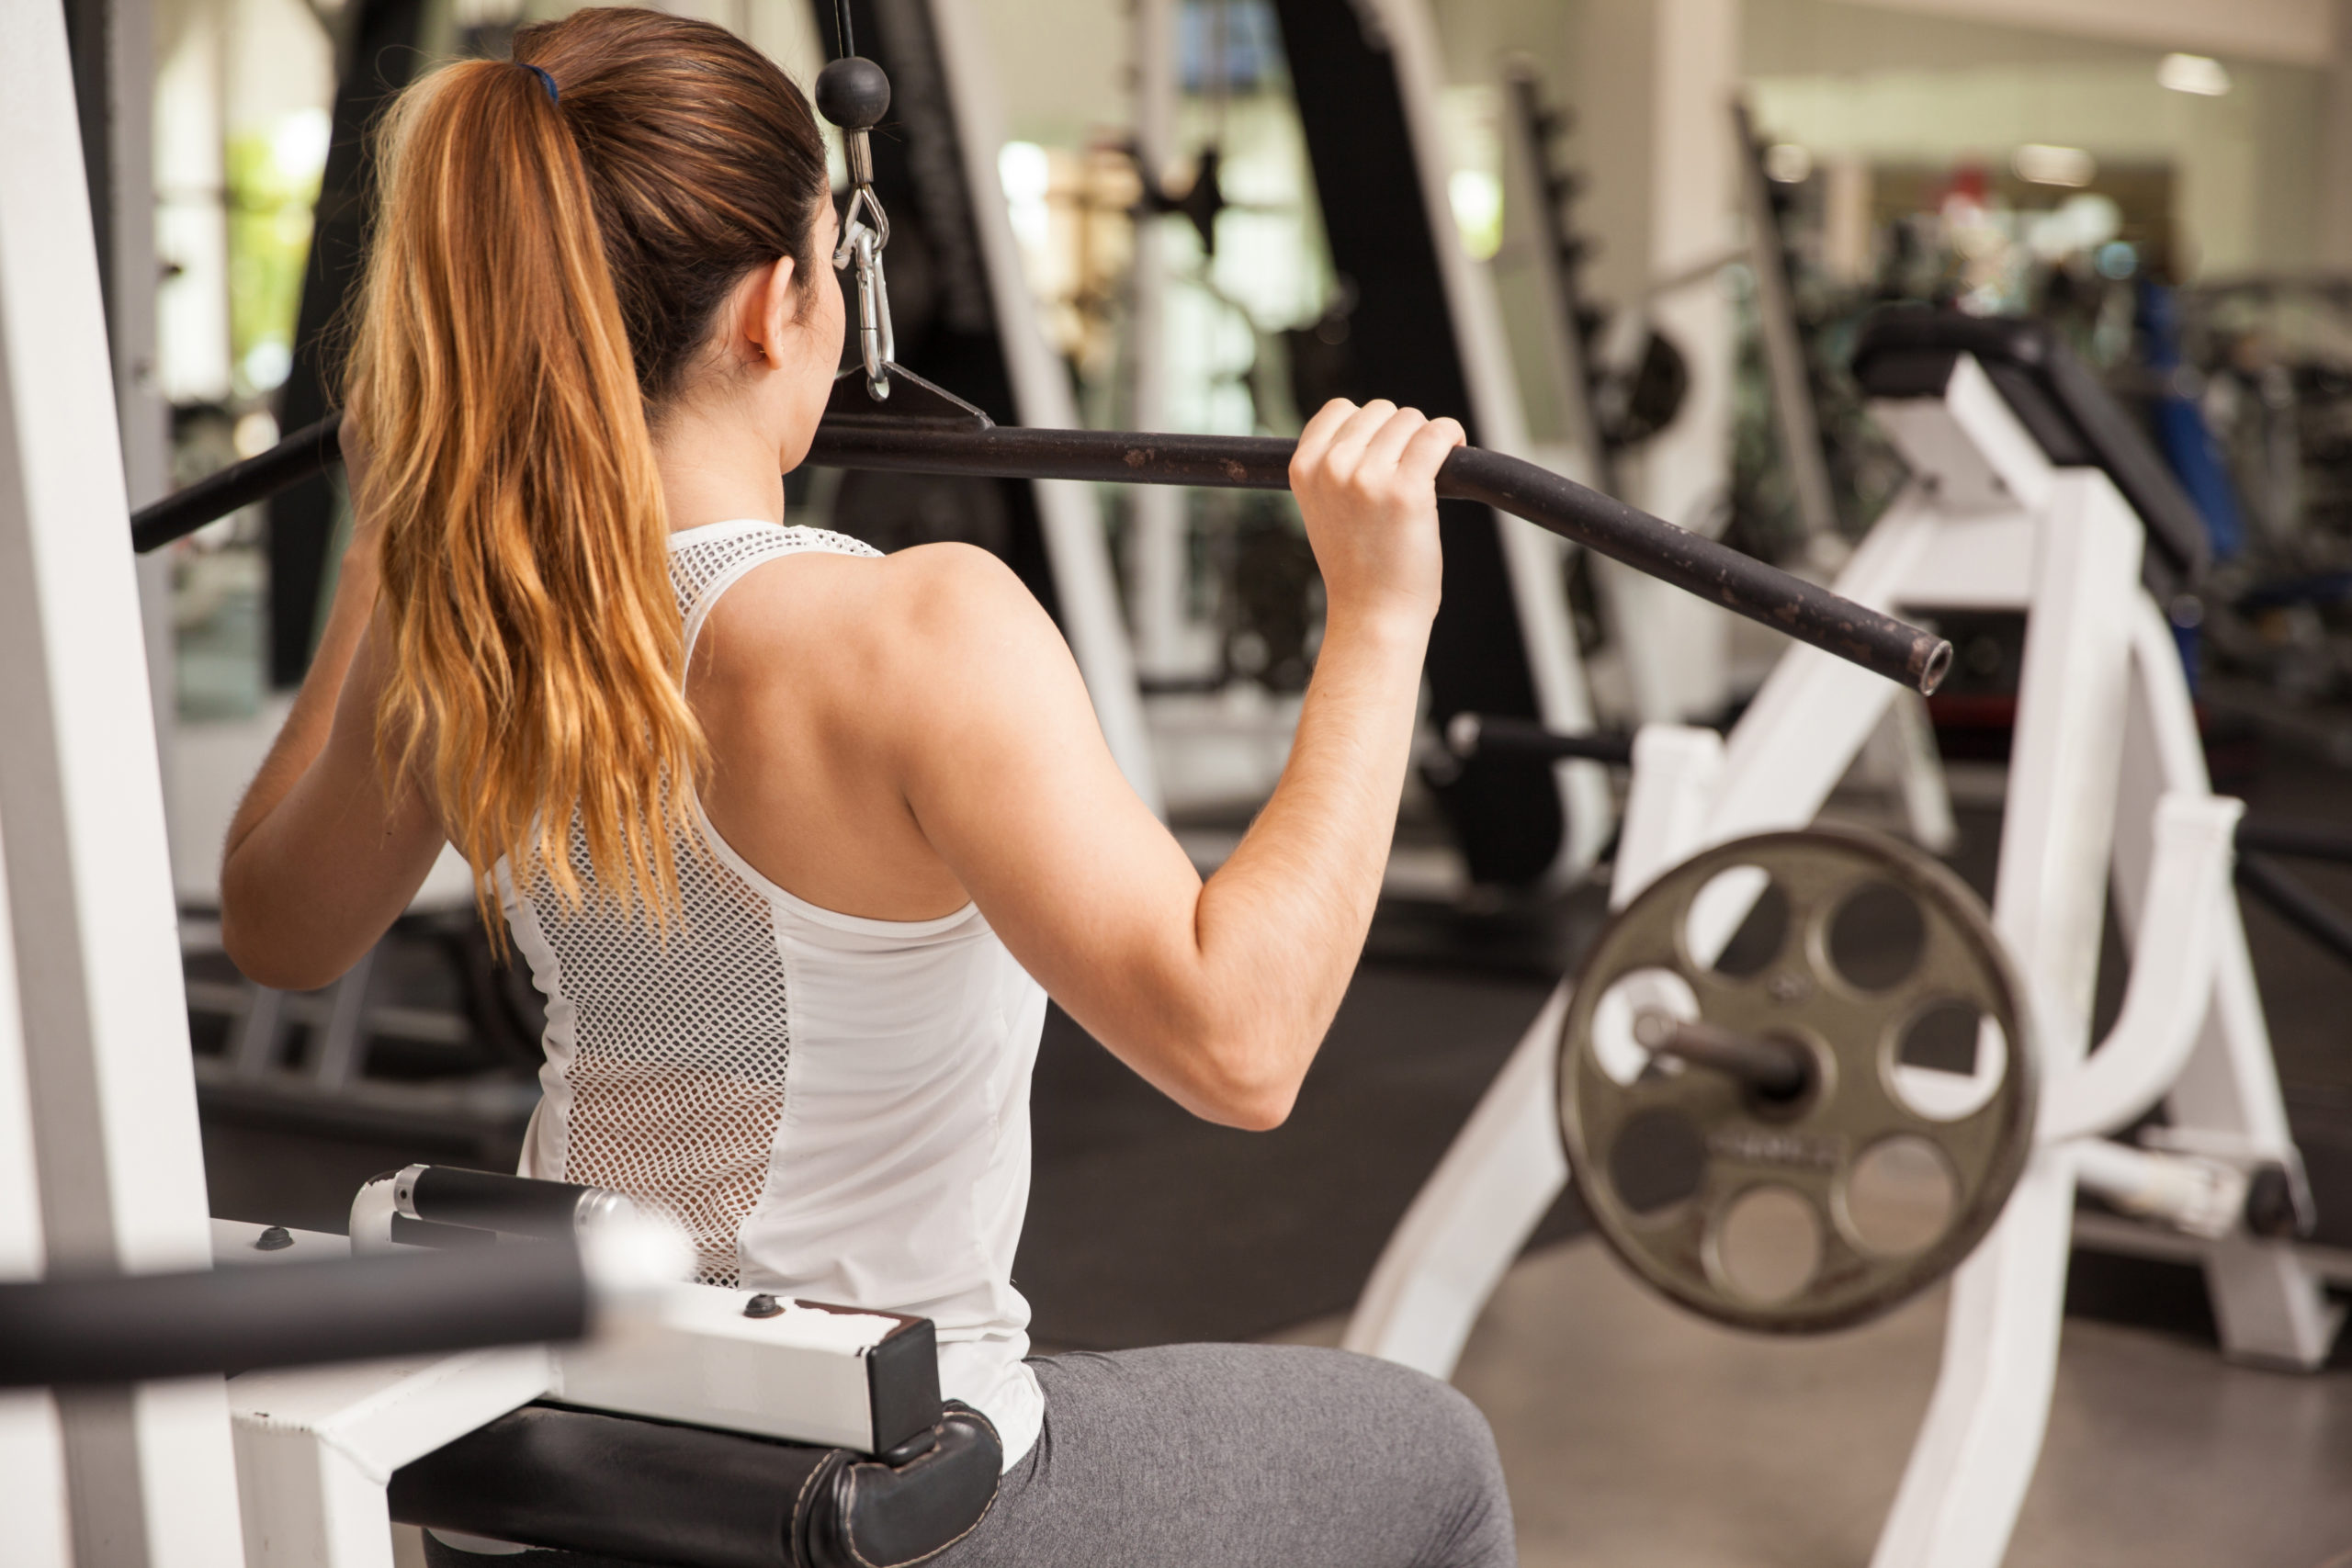 How to Do a Lat Pulldown — Lat Pulldown Machine Tips